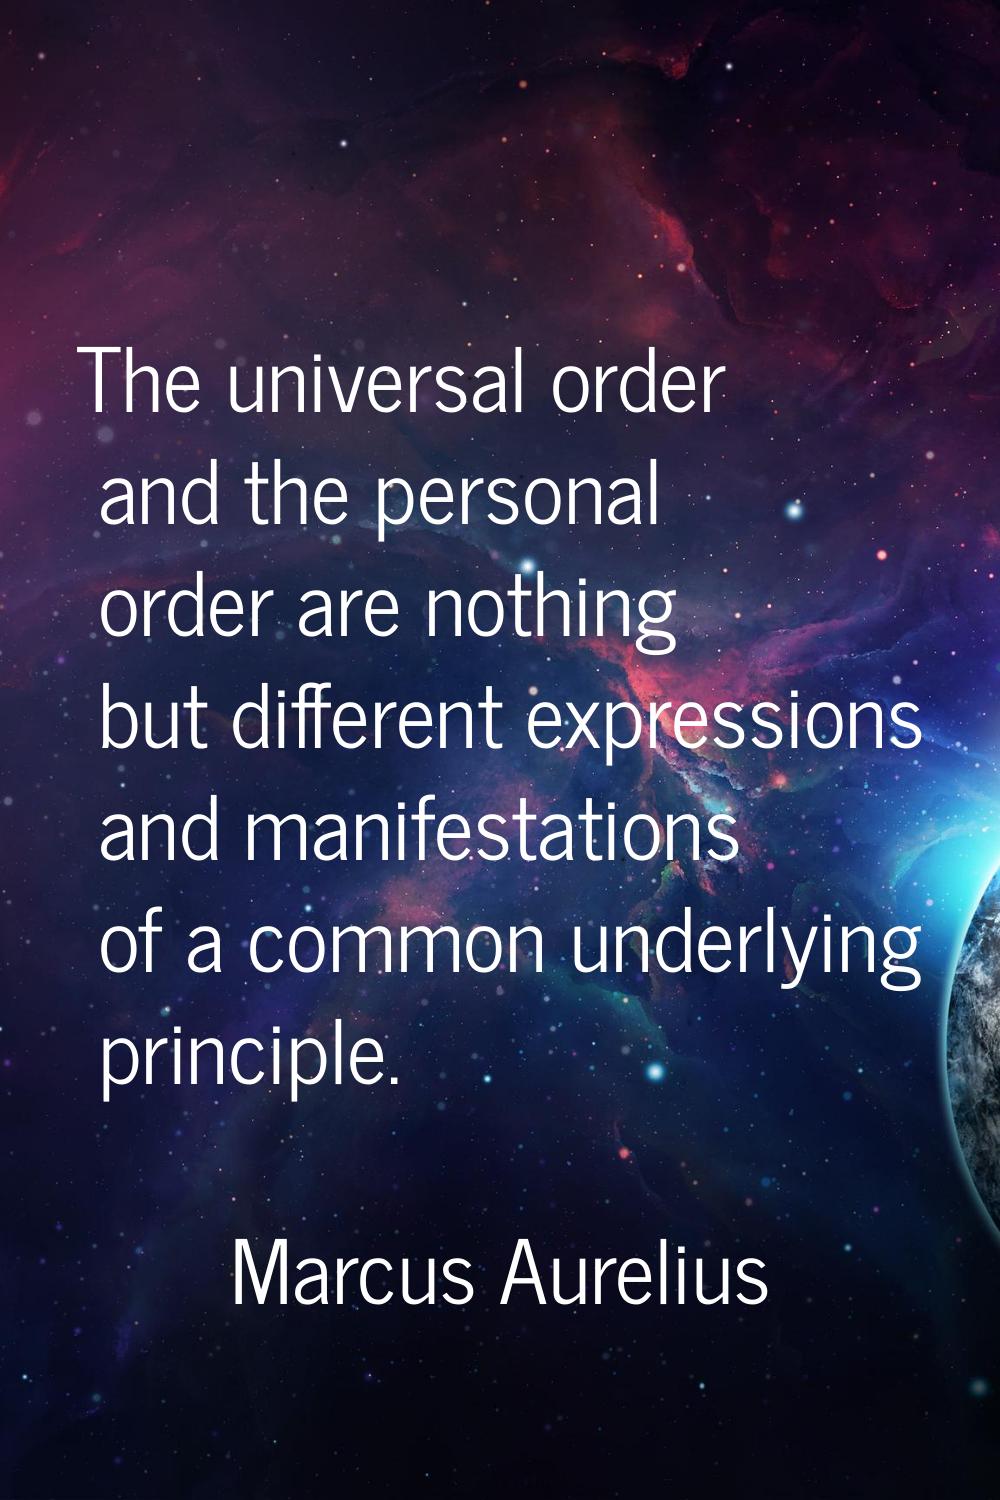 The universal order and the personal order are nothing but different expressions and manifestations